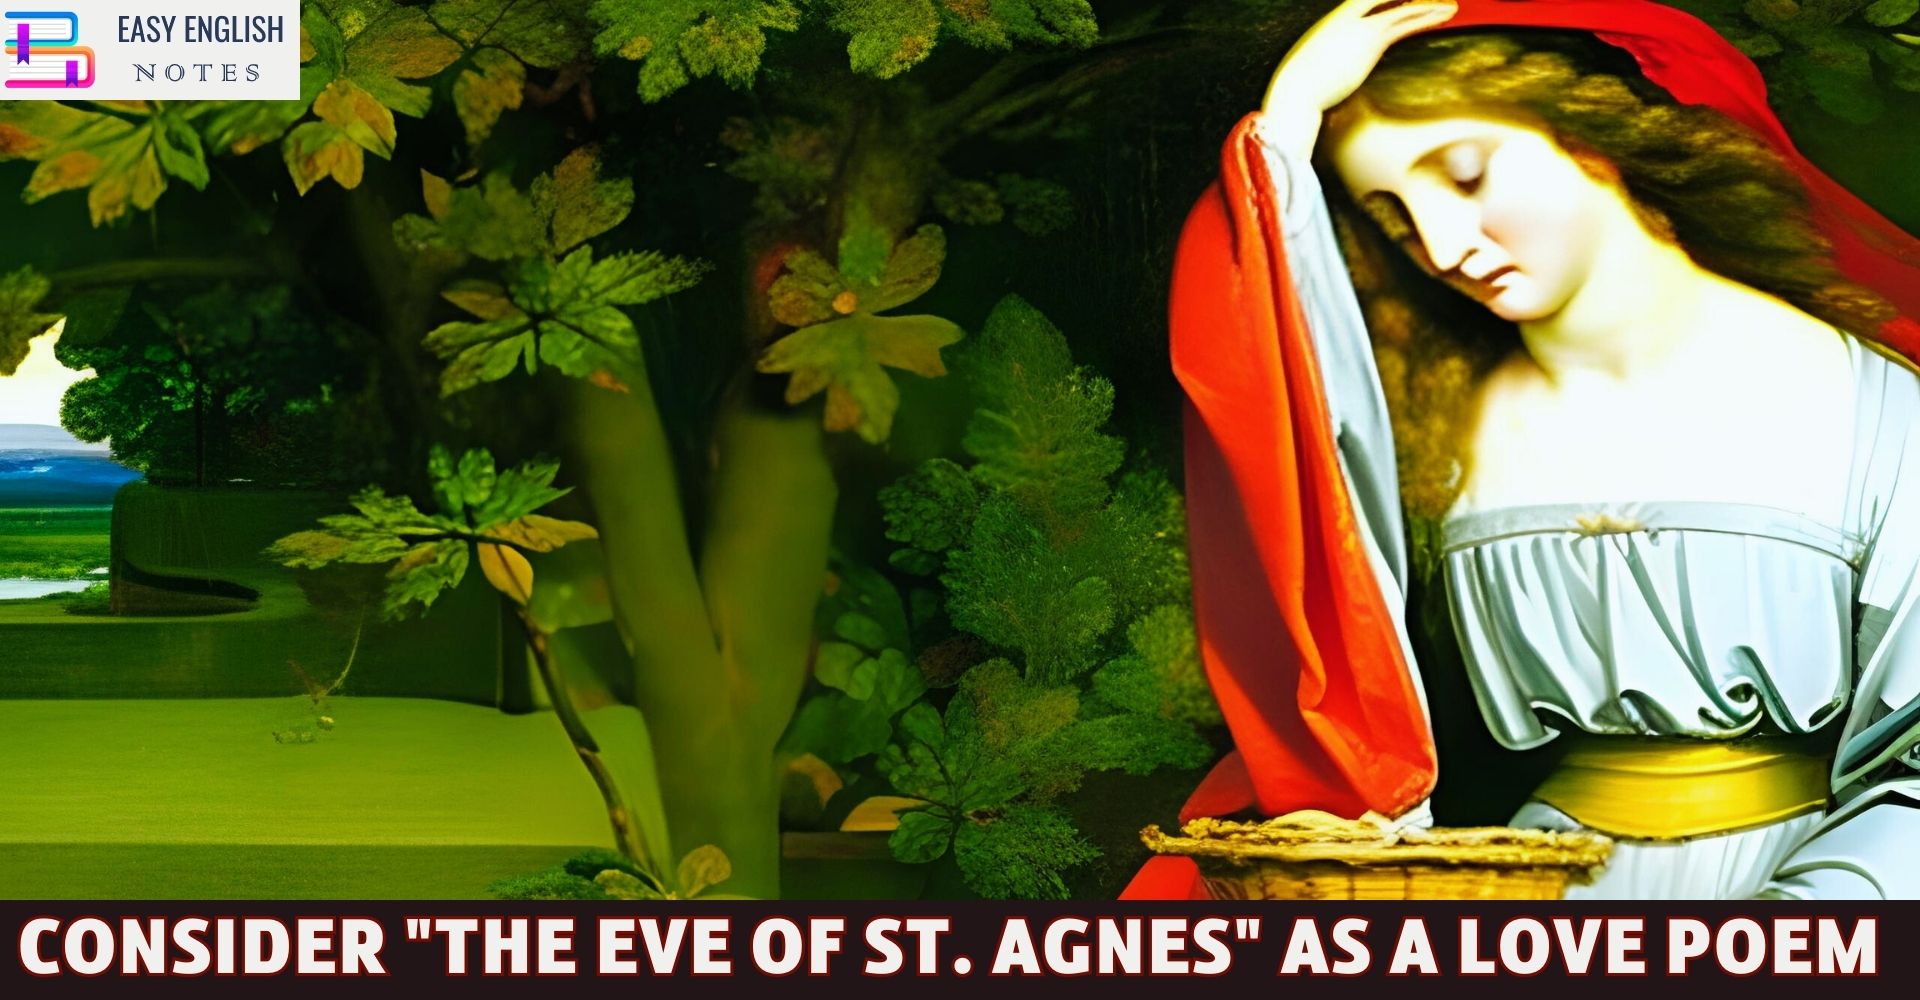 Consider "The Eve of St. Agnes" as a love poem